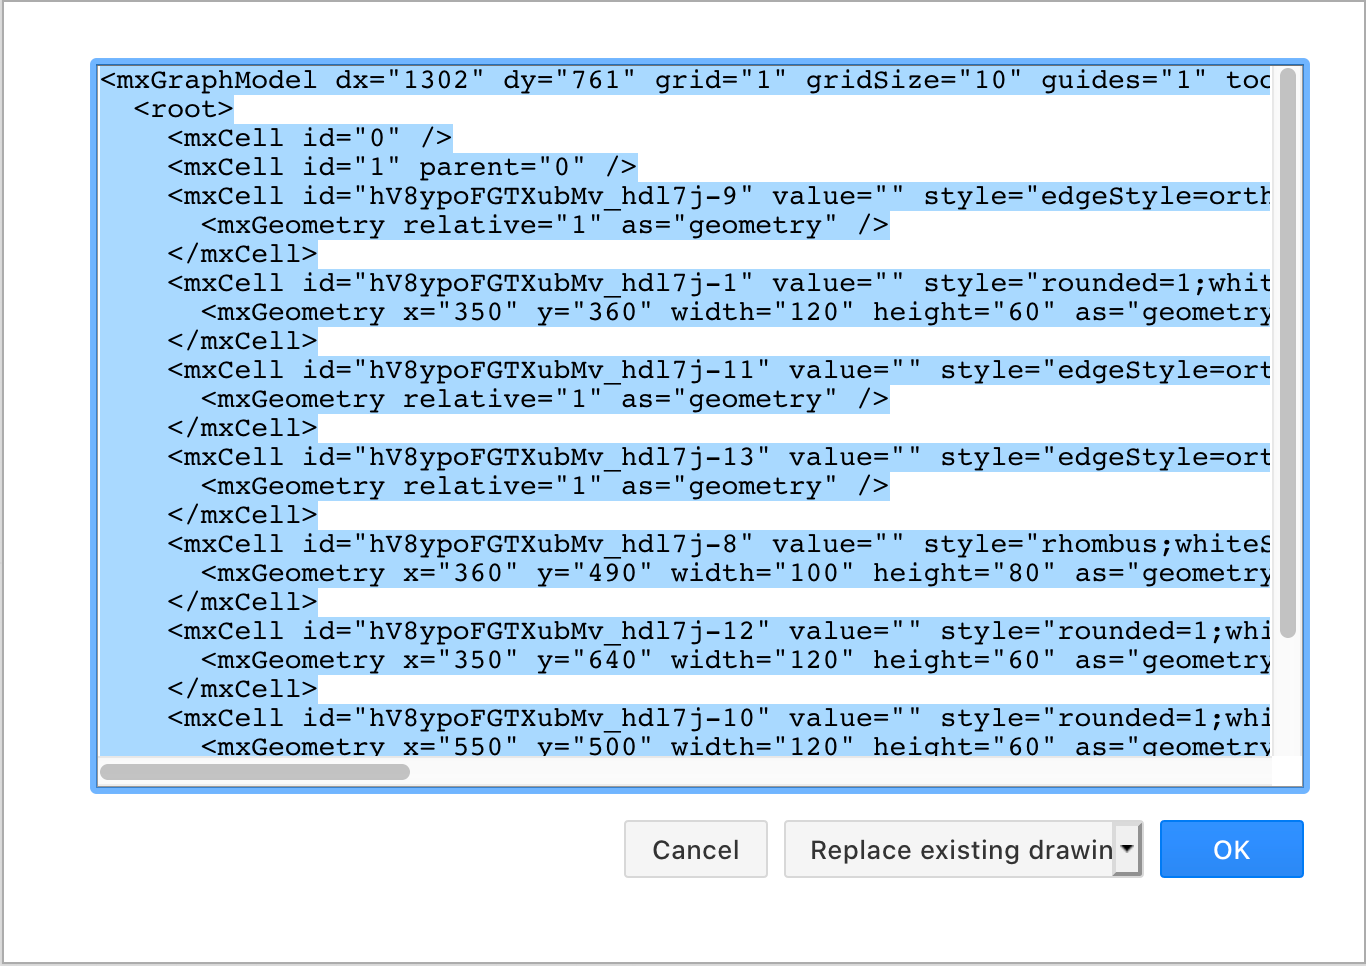 Copy your diagram's XML source into a text file if you ever encounter a problem with saving